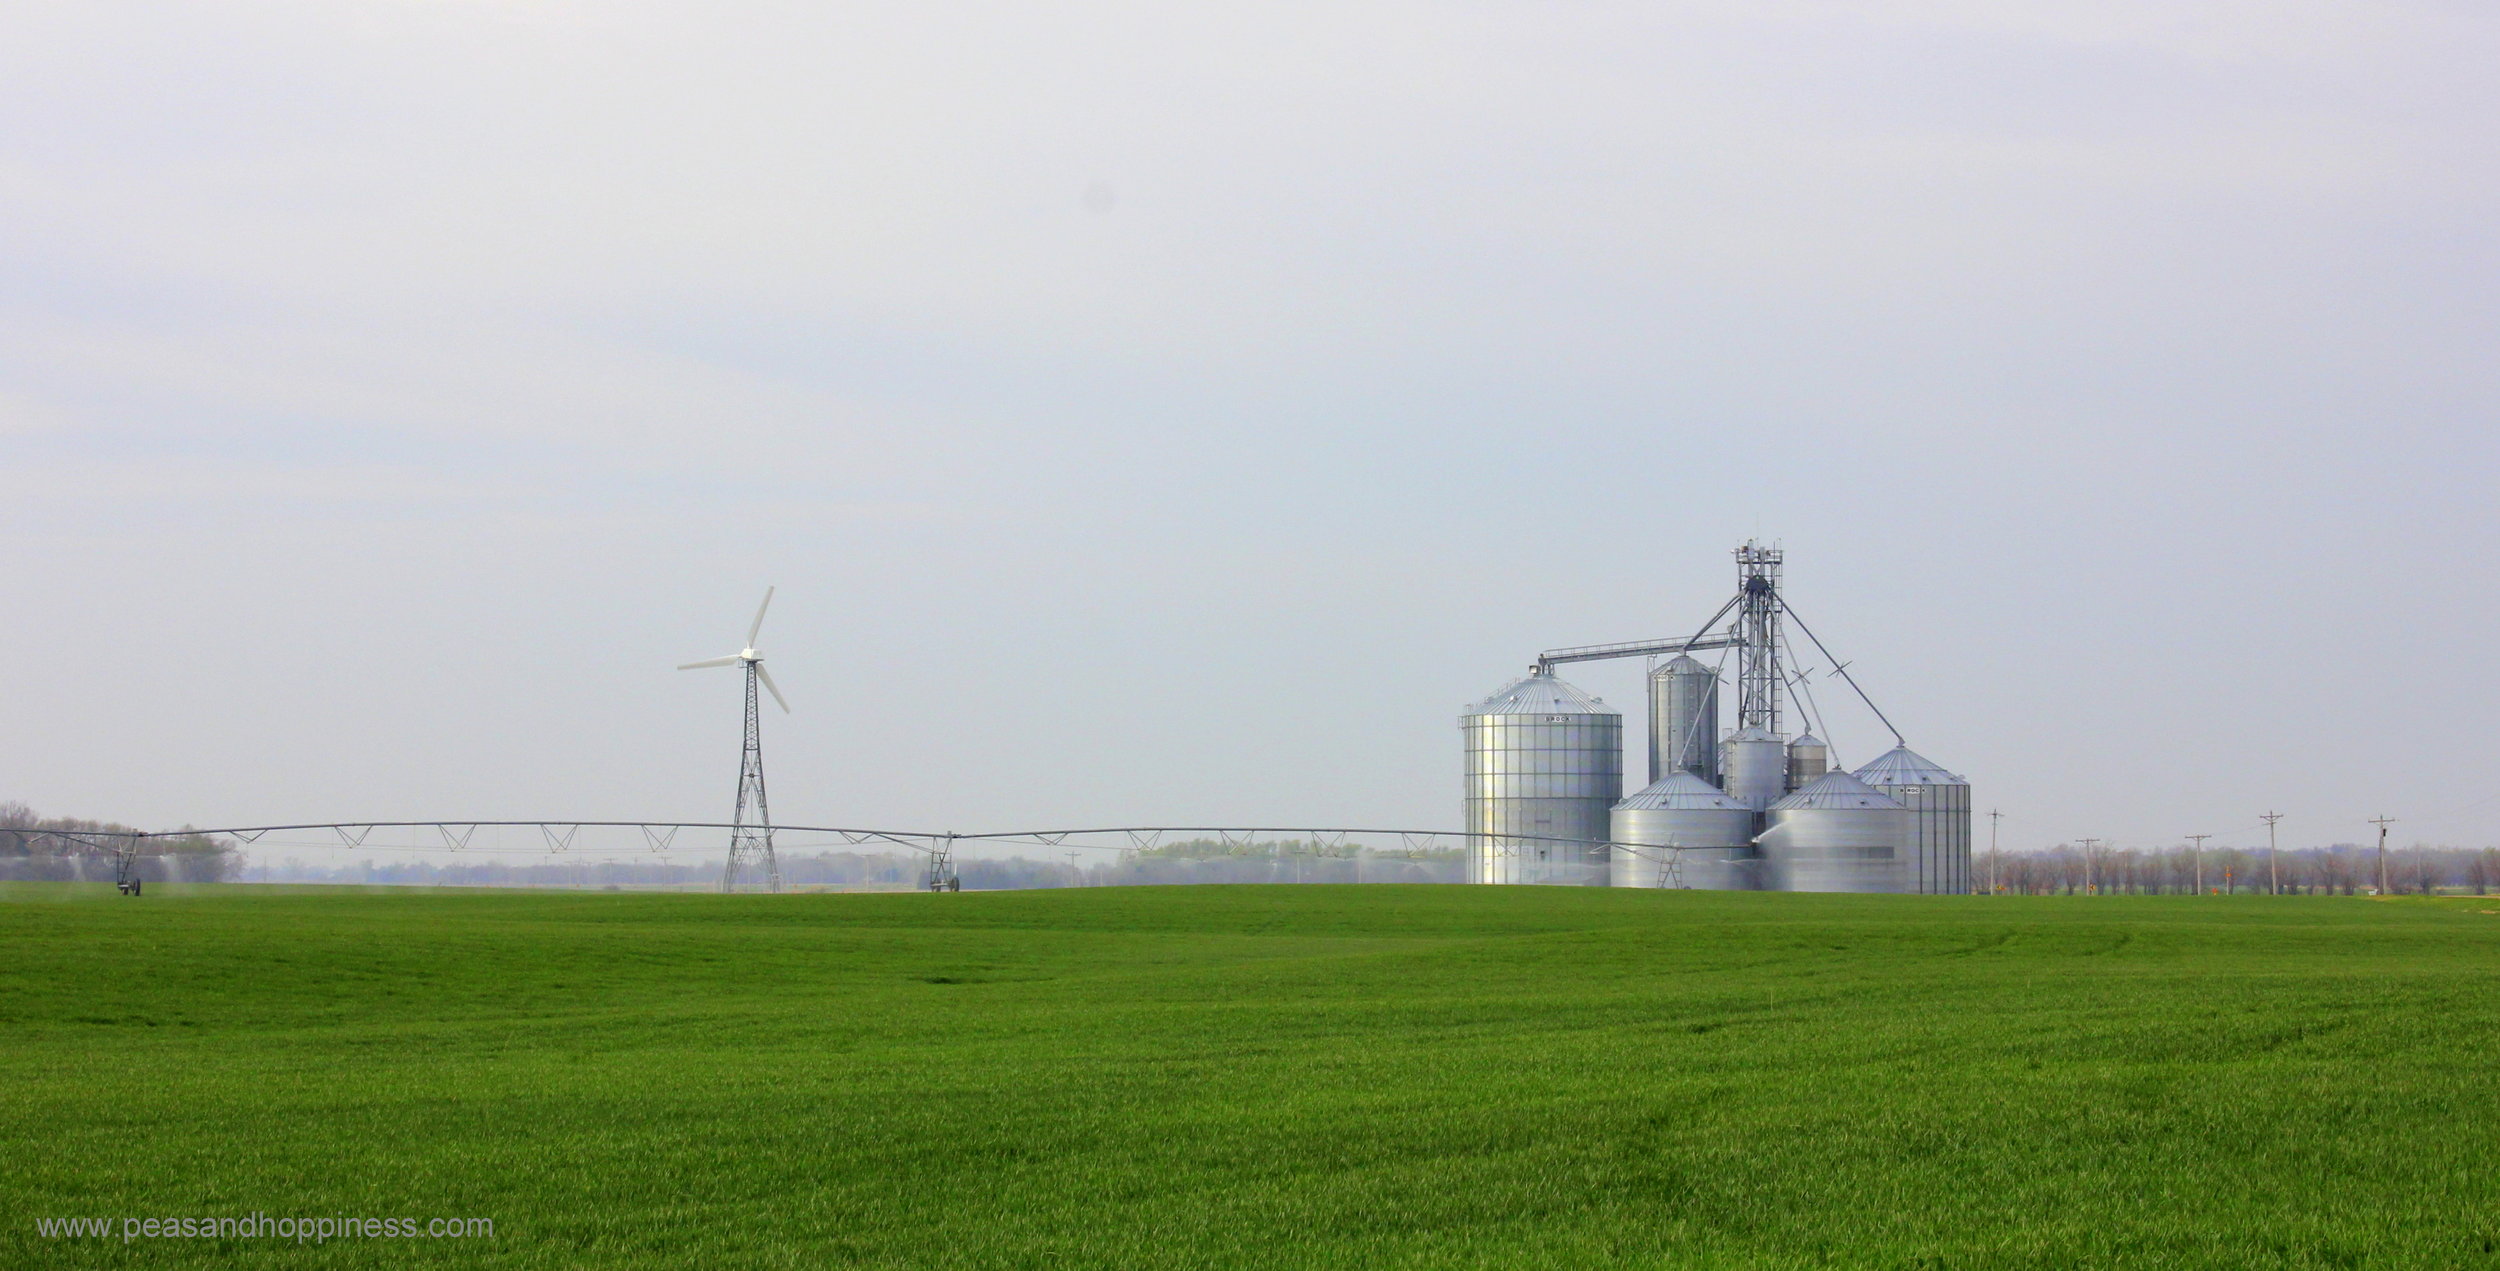 The wind turbine powers the irrigation system at Scheufler Farms